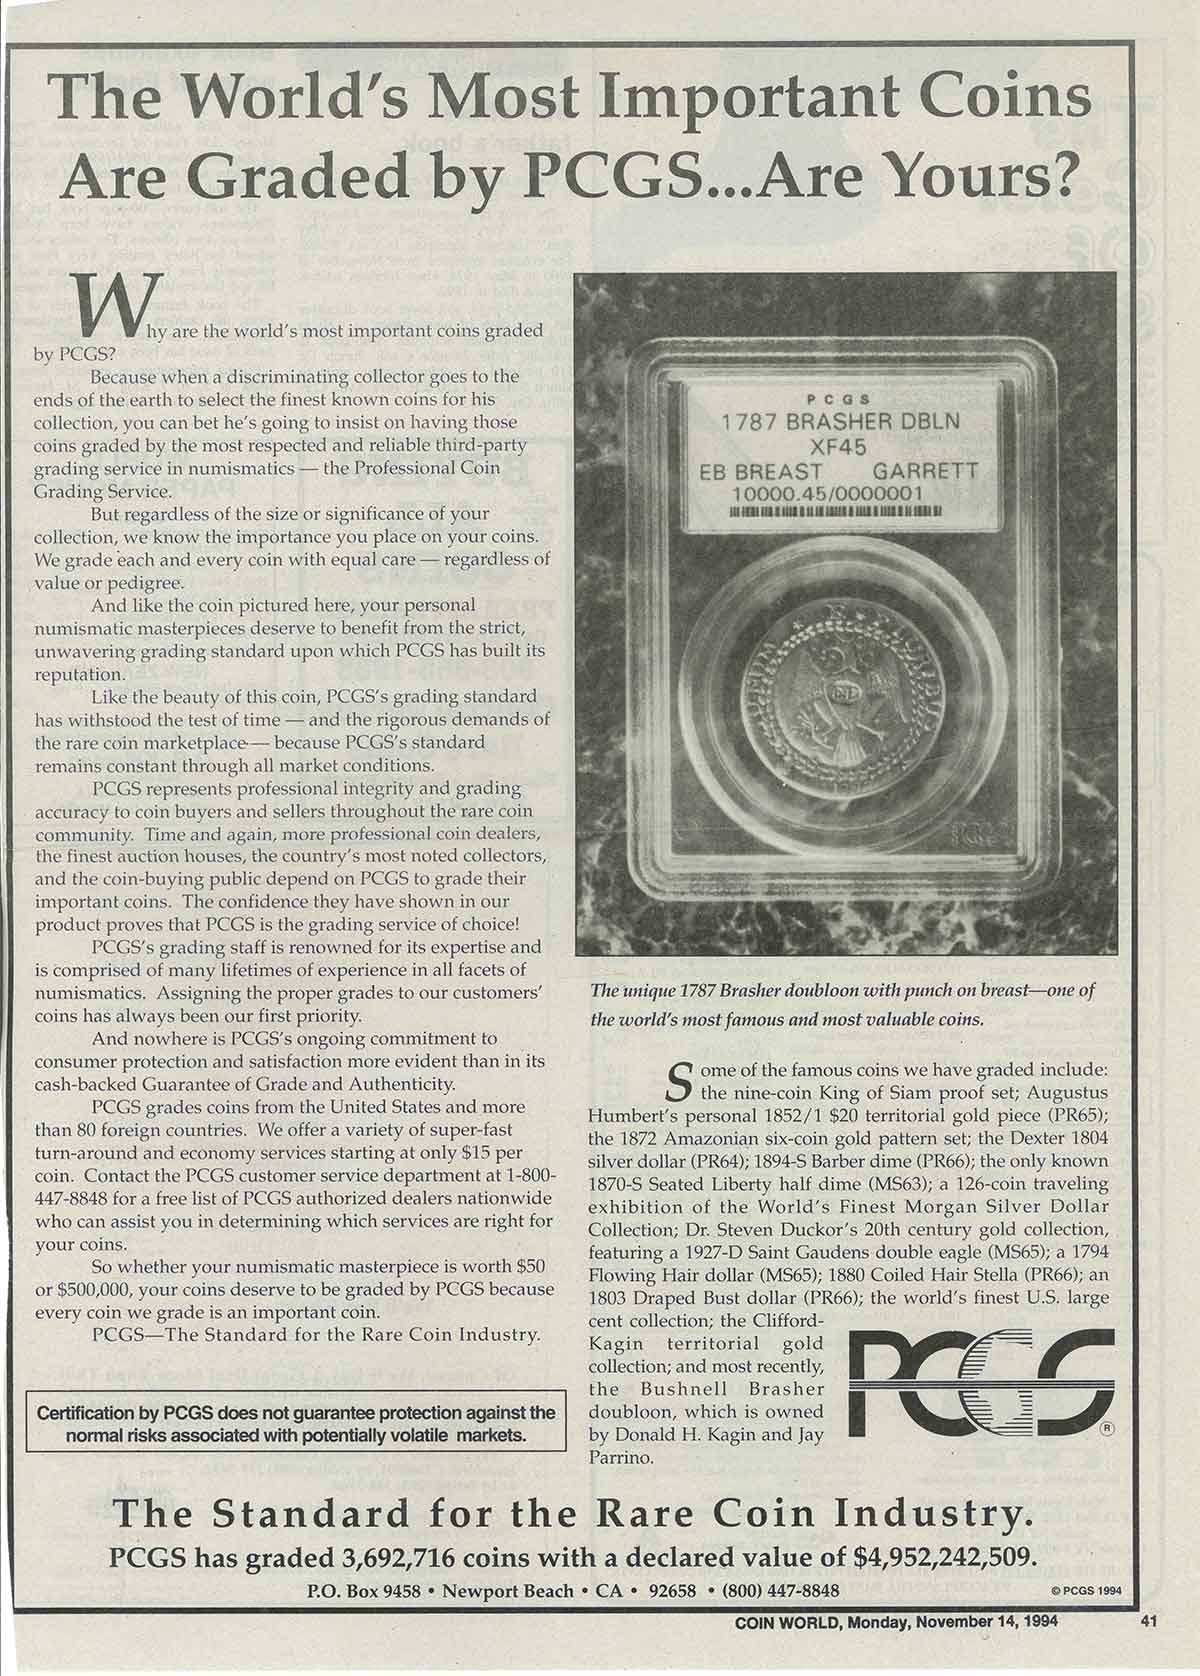 Looking Back on 35 Years of PCGS with an Amazing Memorabilia